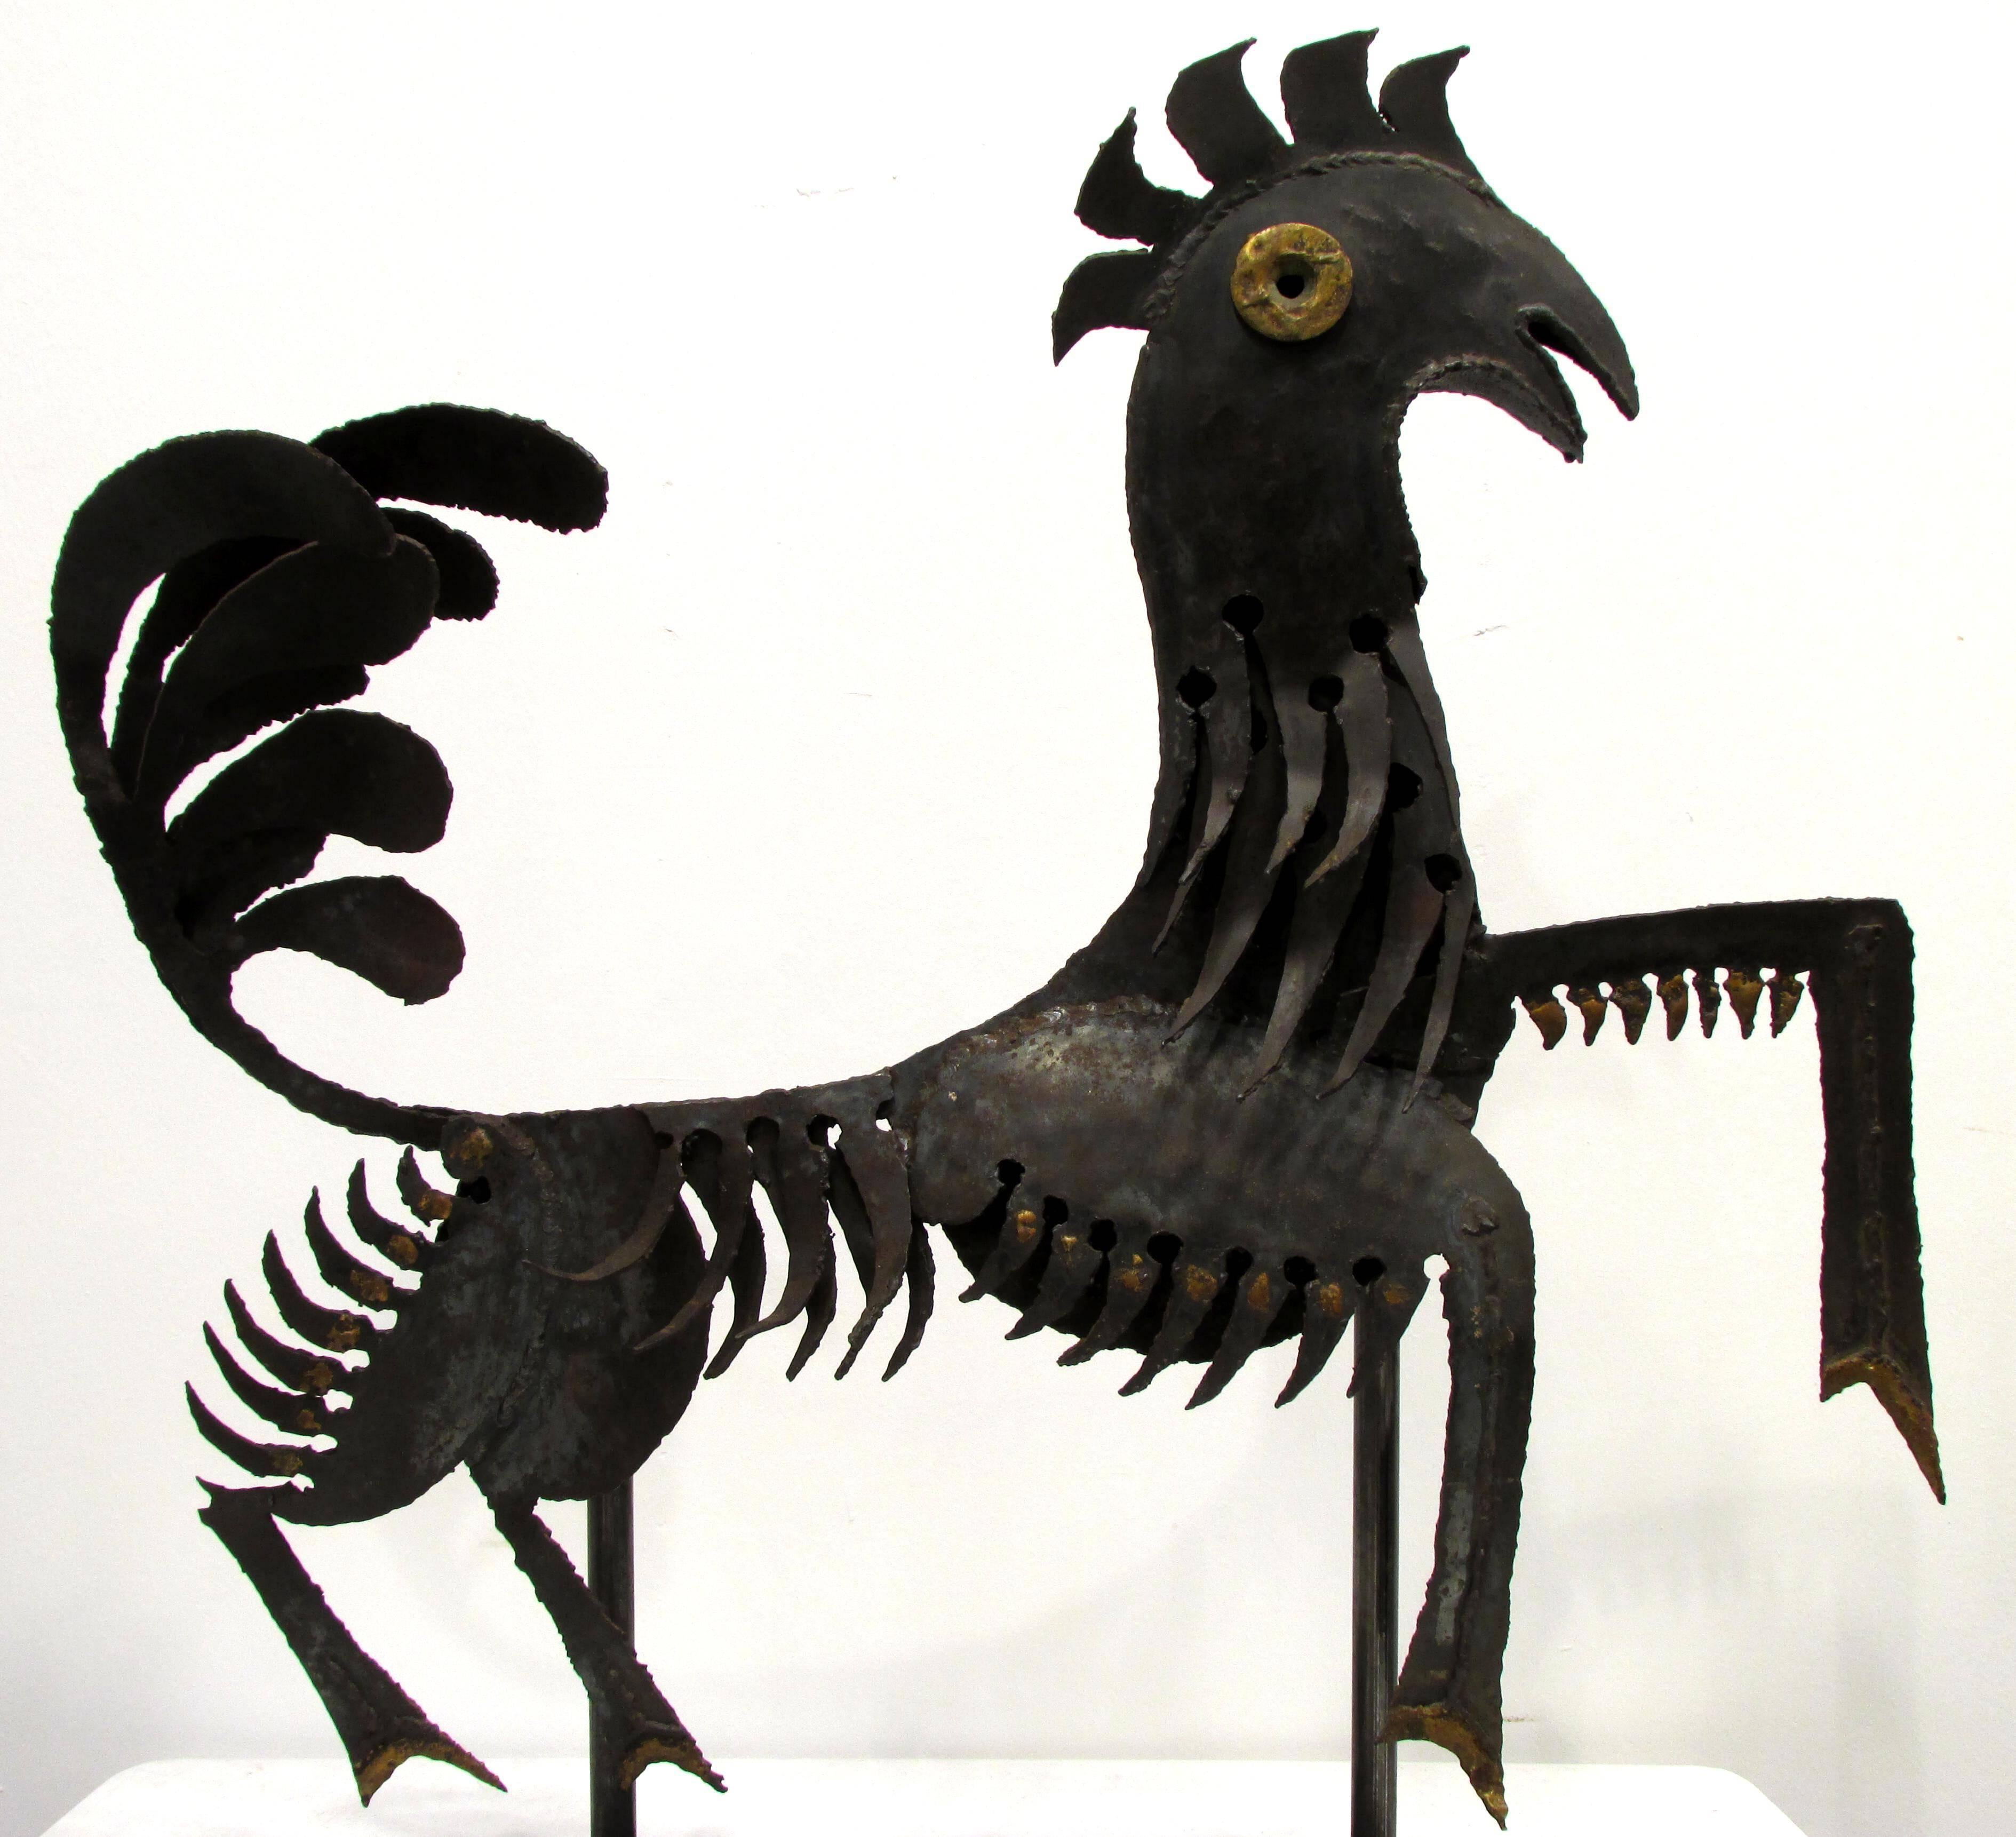 Torch cut metal sculpture of a rooster goat mix mythical figure with bronze brazed accents from Haiti mounted on new metal stand.